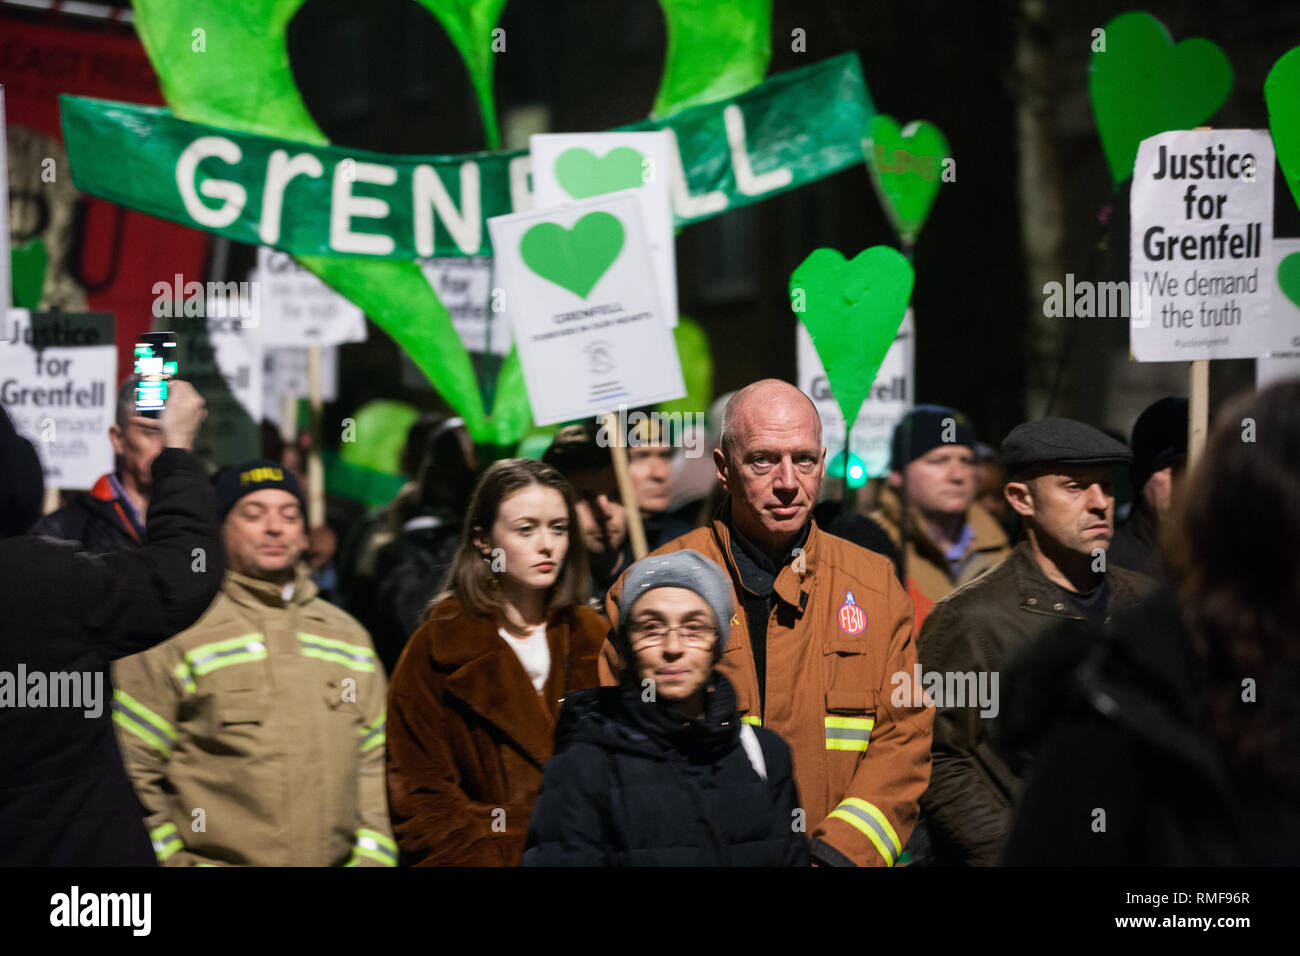 London, UK. 14th February, 2019. Matt Wrack, General Secretary of the Fire Brigades Union (FBU) joins members of the Grenfell community taking part in the Grenfell Silent Walk around North Kensington on the monthly anniversary of the fire on 14th June 2017. 72 people died in the Grenfell Tower fire and over 70 were injured. Credit: Mark Kerrison/Alamy Live News Stock Photo